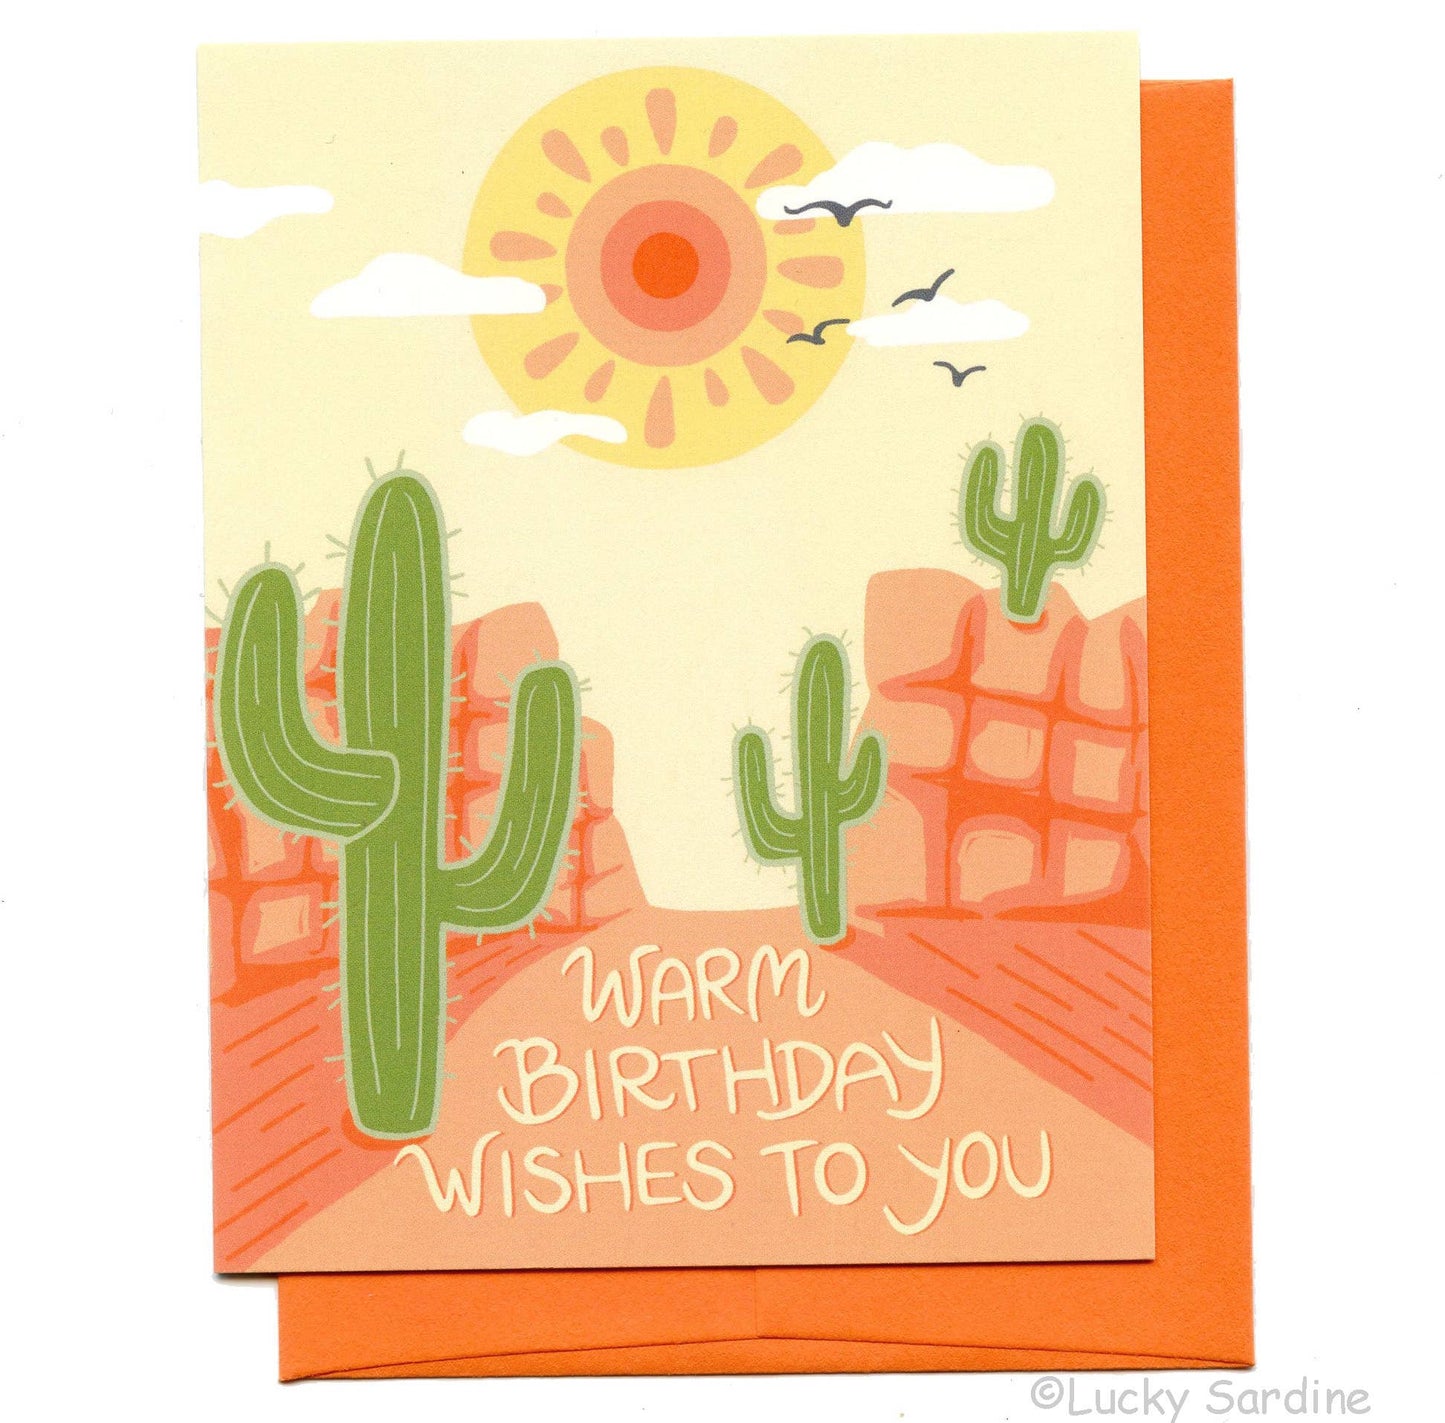 Warm Birthday Wishes To You, Desert Card